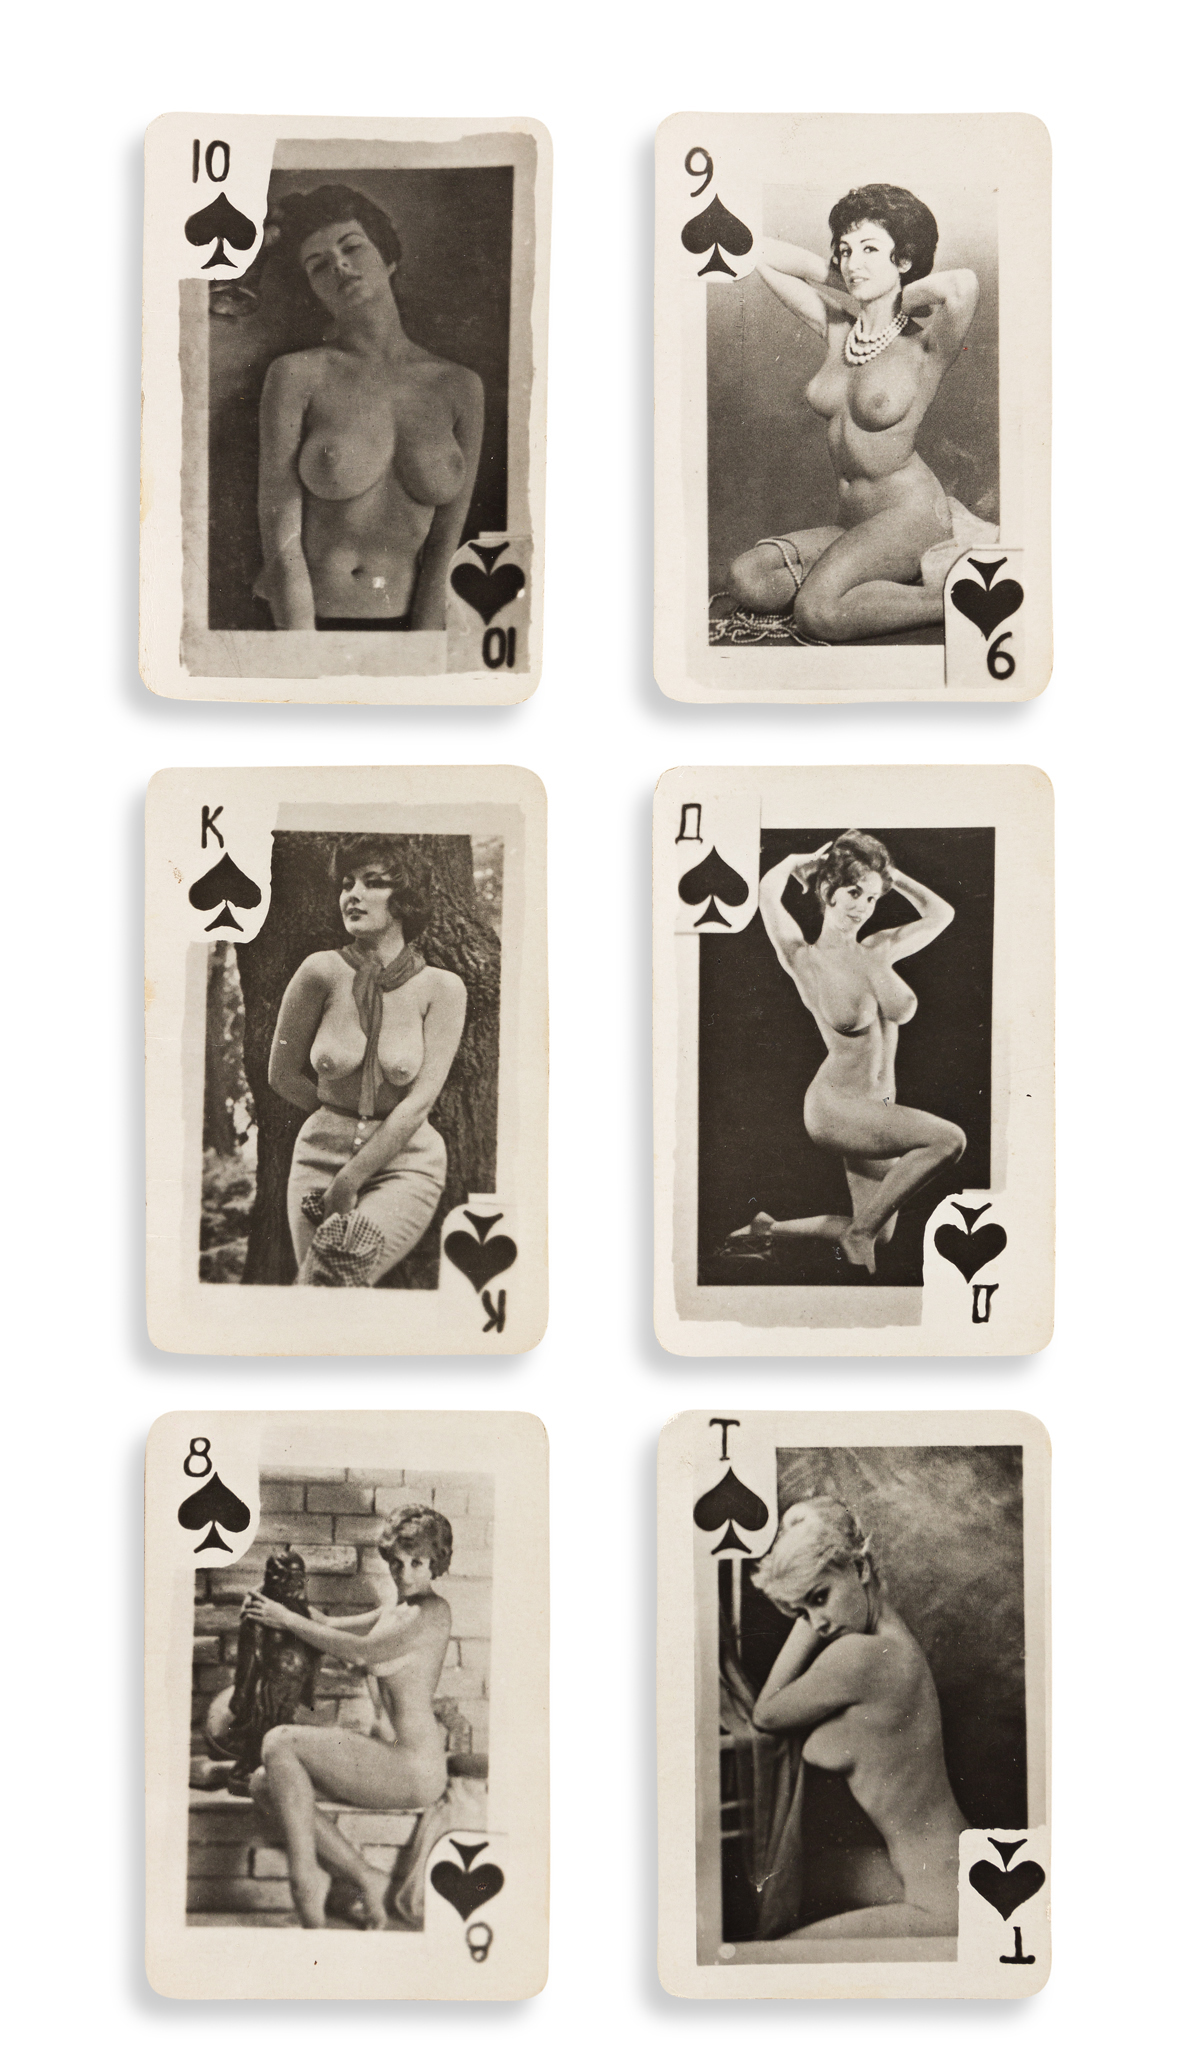 PLAYING CARDS) A complete deck of 36 Russian photographic p